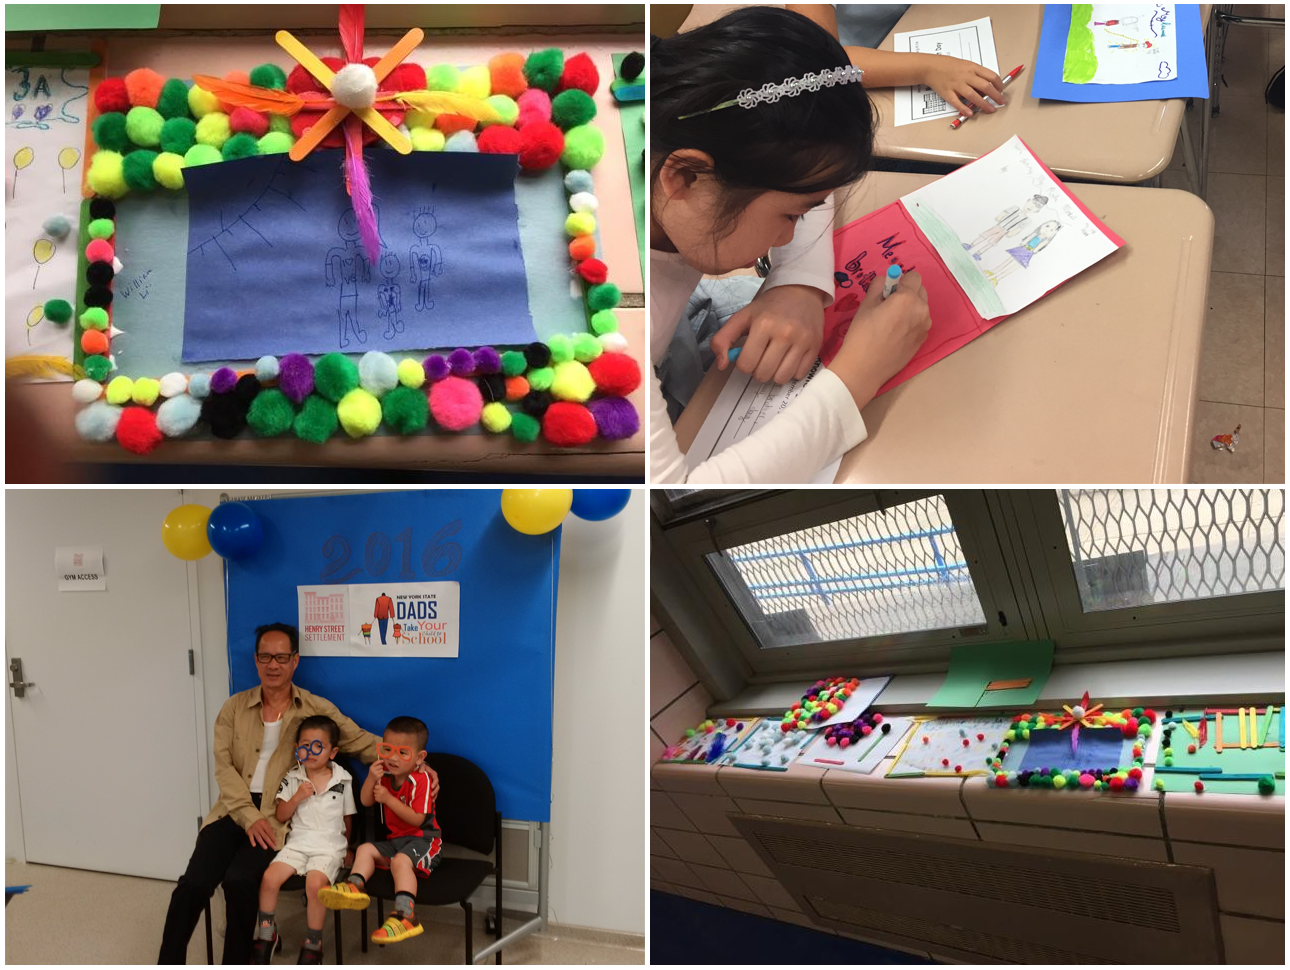 Collage of photos of Dad's Day crafts and family in photo booth at Early Childhood Education Center